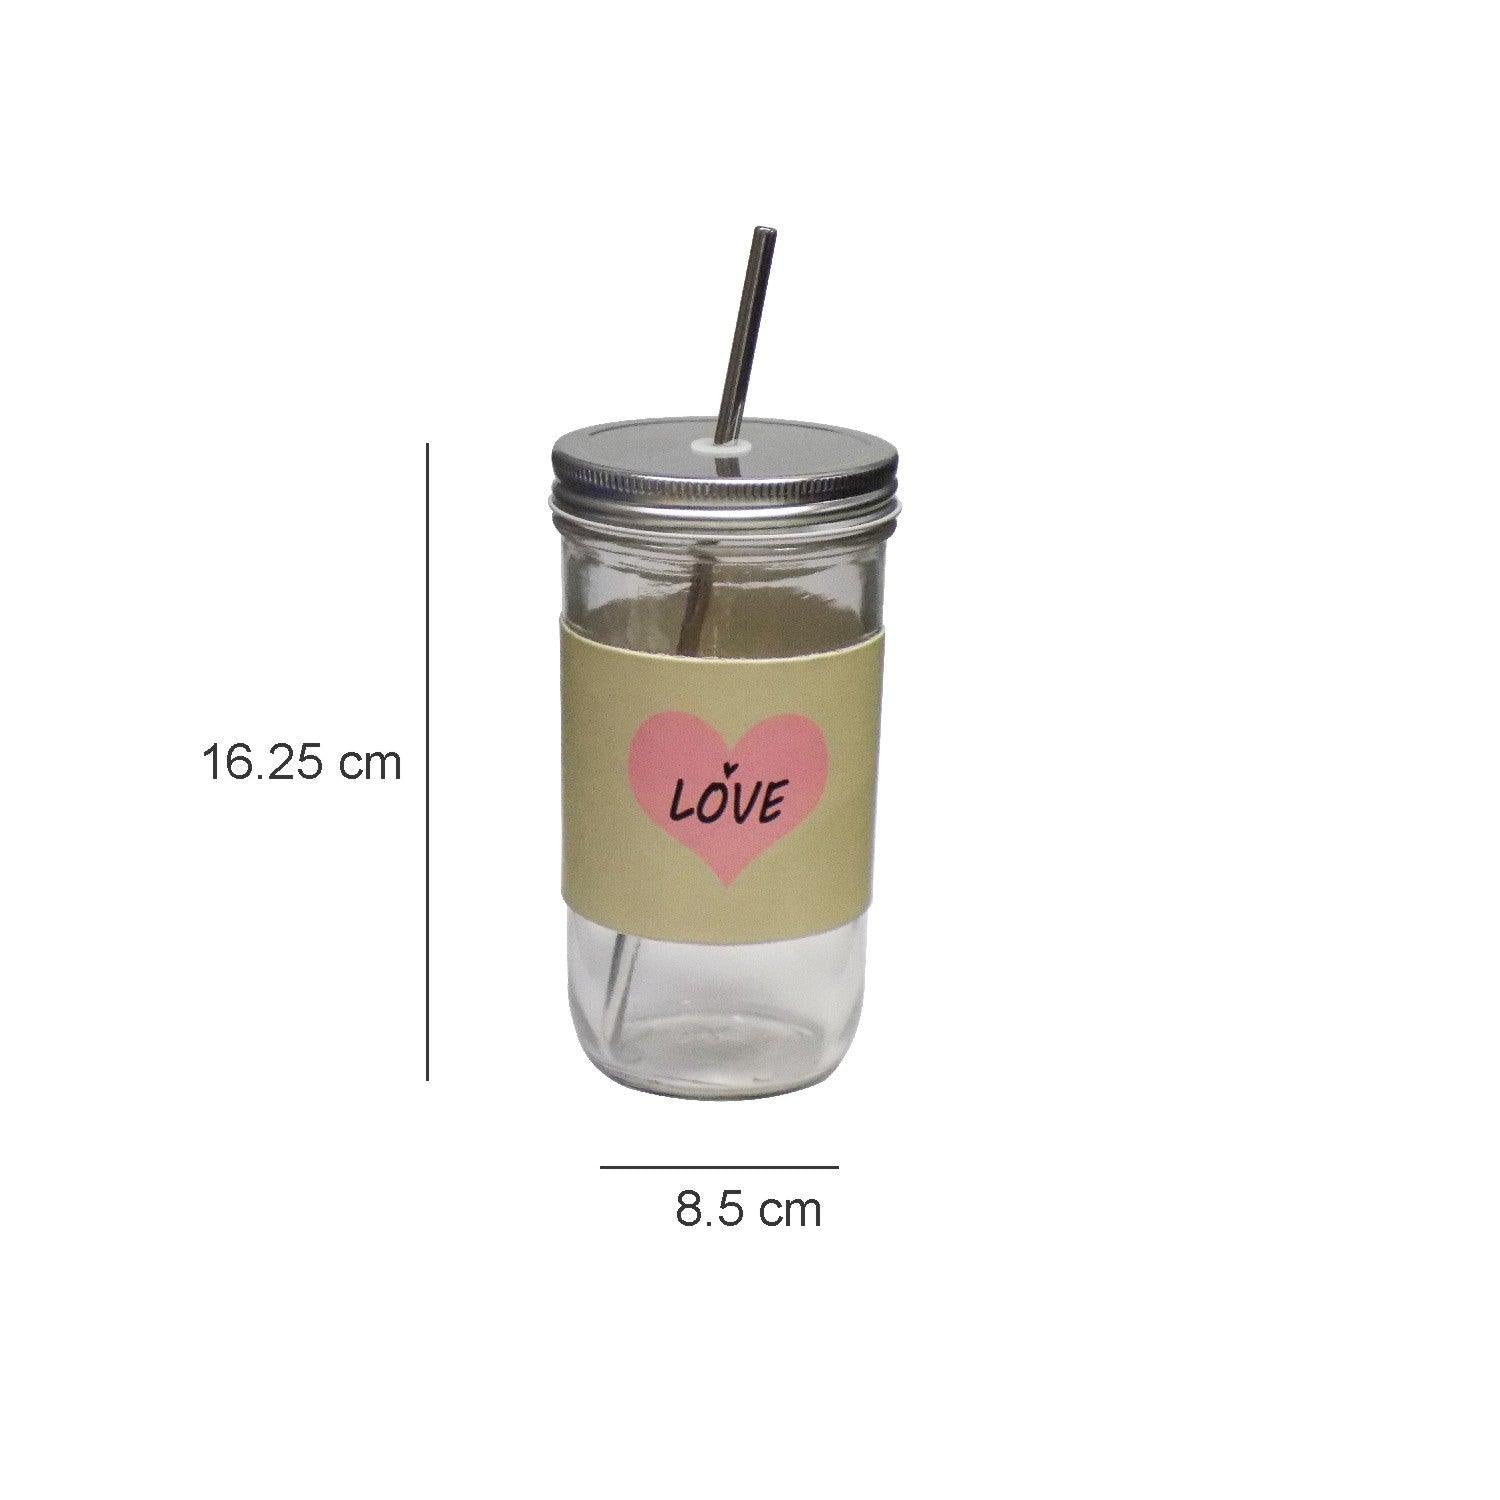 Market99 Mason Sipper, with Stainless Steel Straw & PU Sleeve, Masson Tumbler, Mason Jar, Love Printed Design, Silver Colour, Glass, 600 mL - MARKET 99